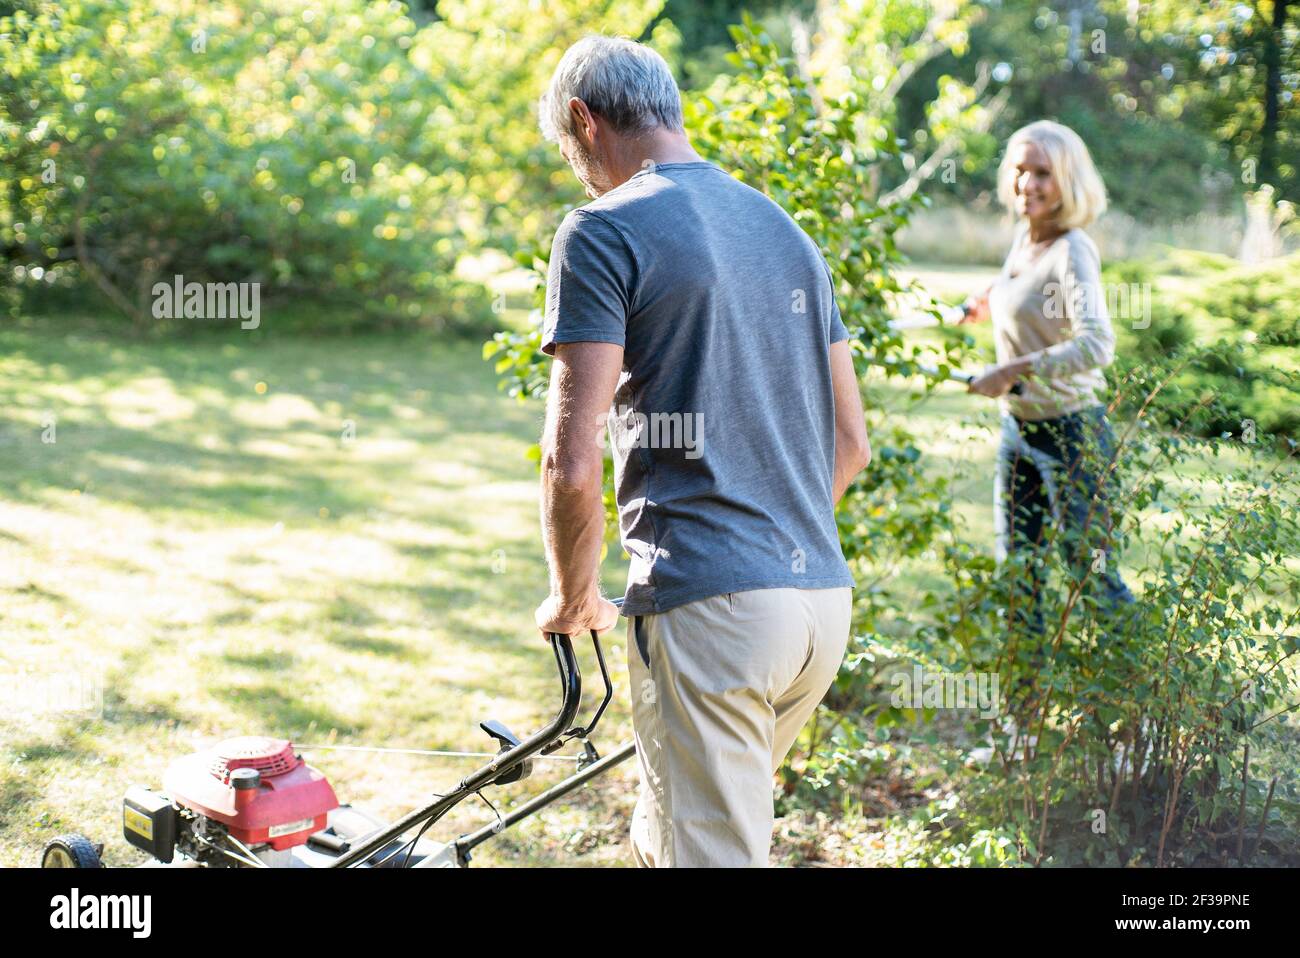 Mature man mowing lawn in backyard while his wife working in background Stock Photo